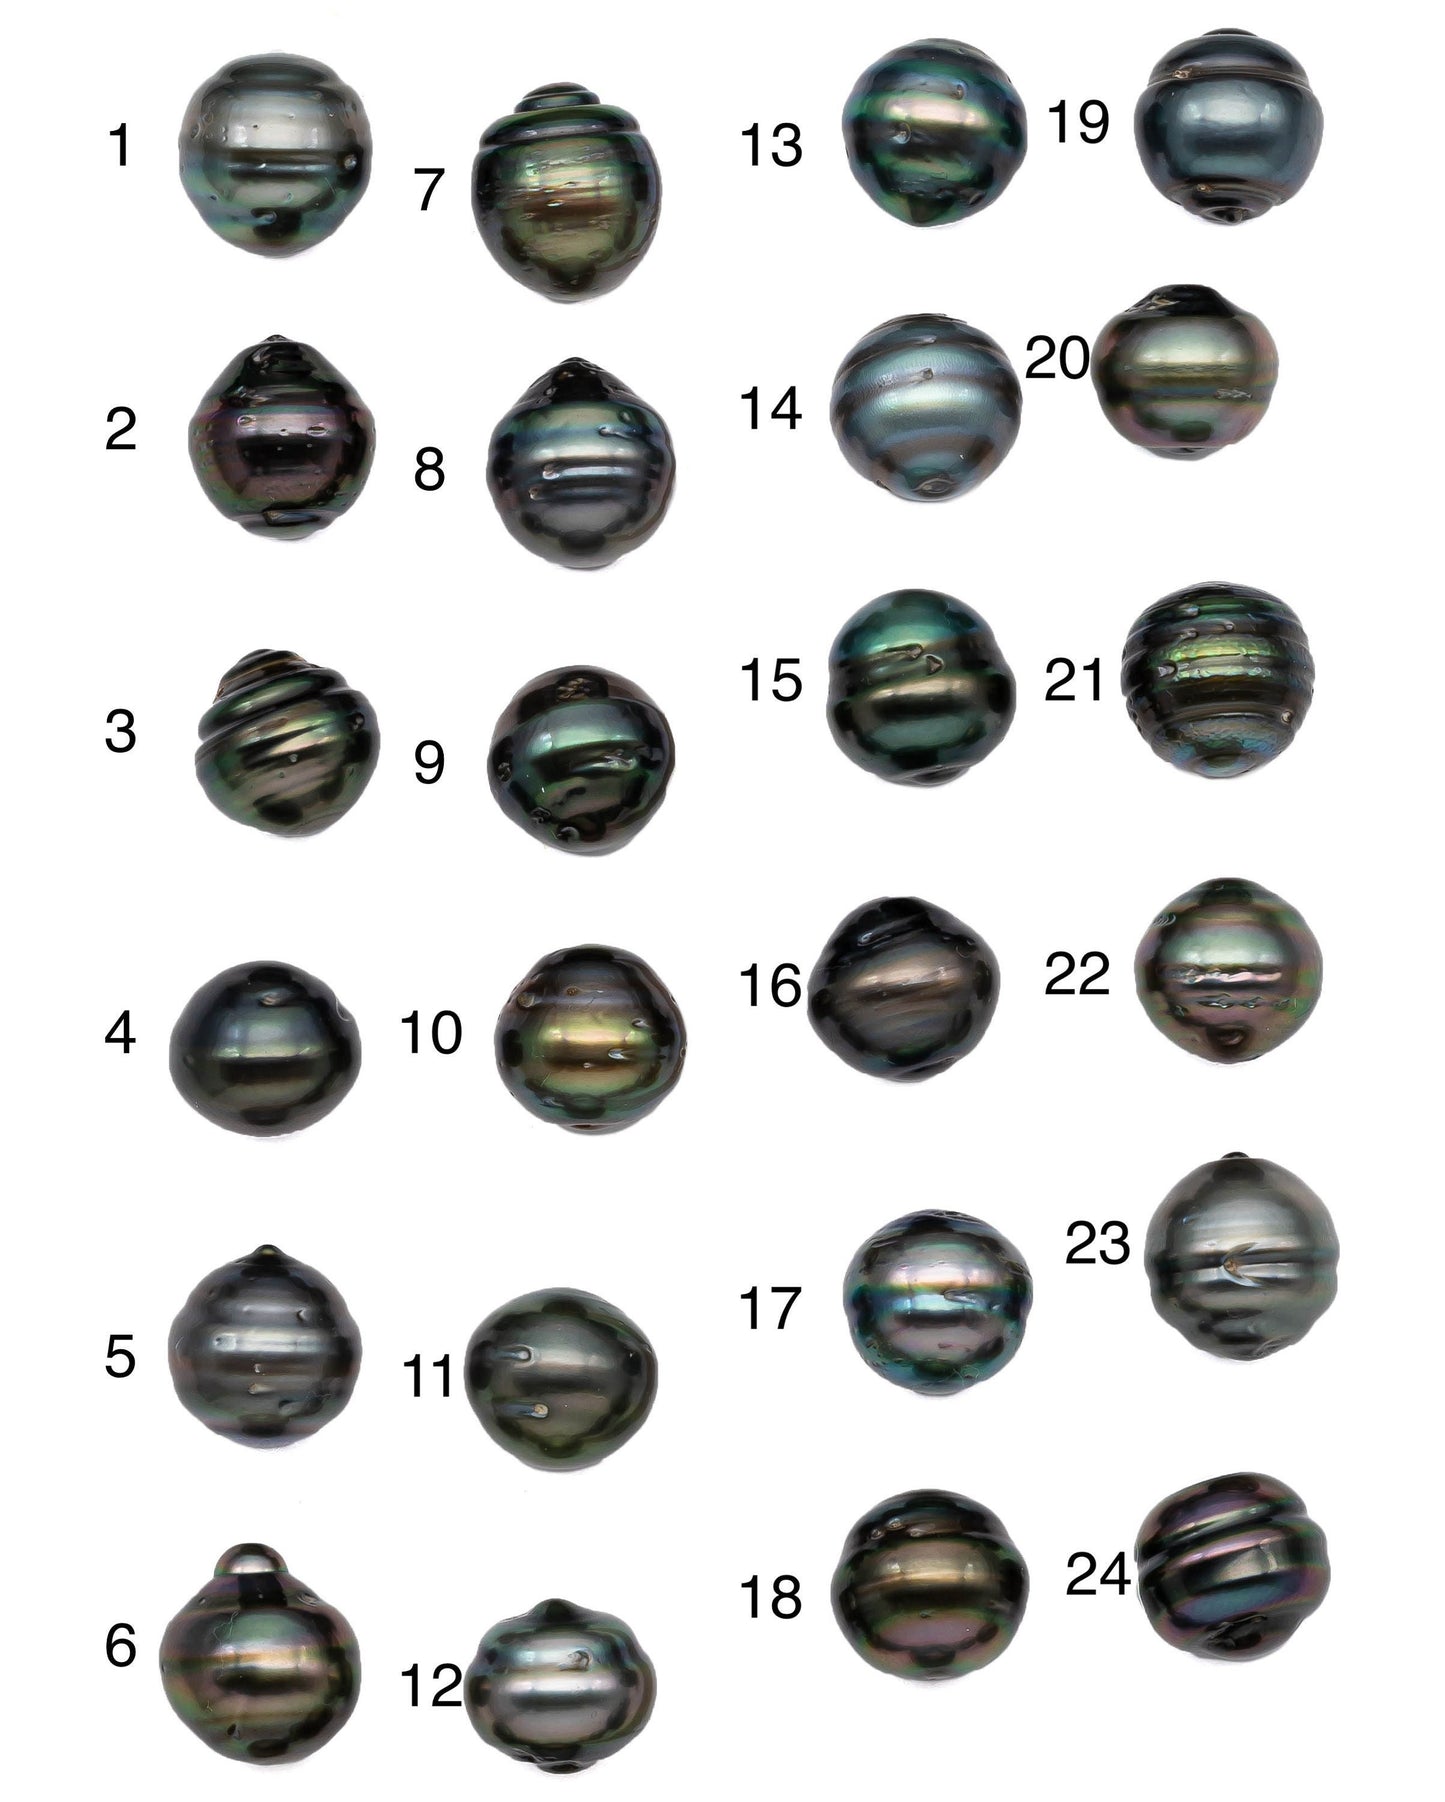 Single Tahitian Pearl Natural Color Drops with Blemishes and High Luster, One Piece Undrilled Loose Pearl in 11-11.5mm, SKU#1081TH